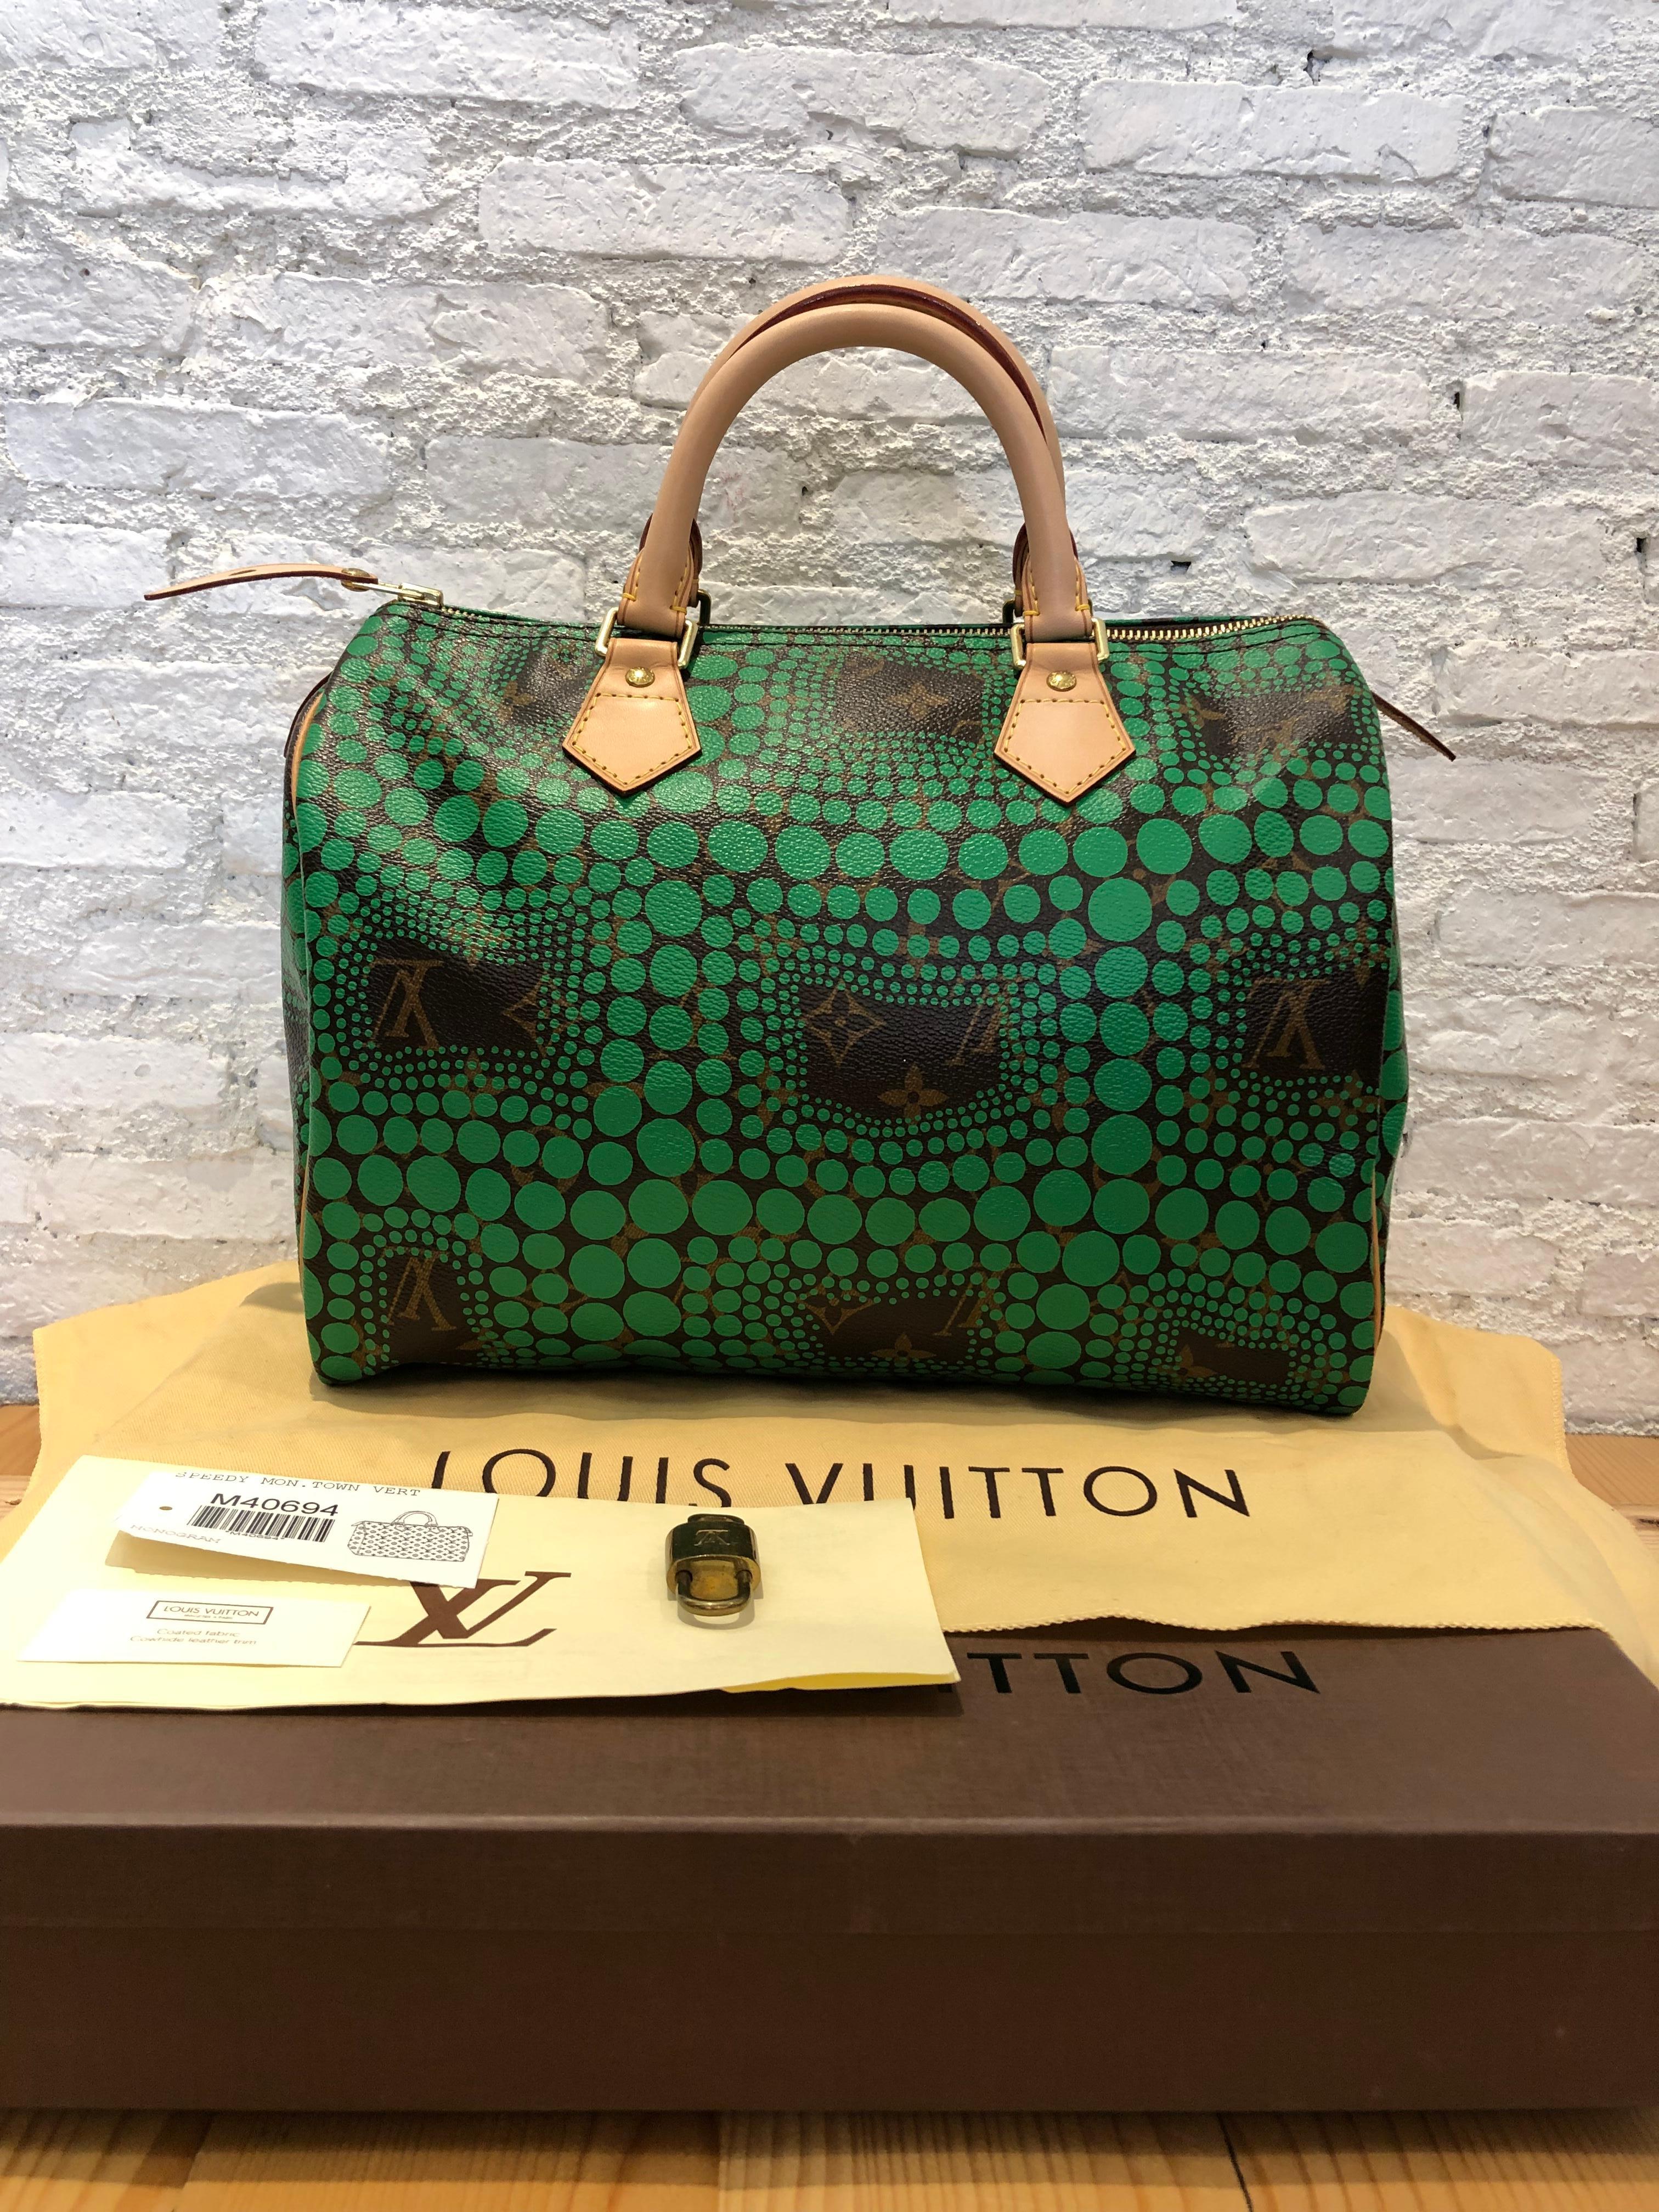 This LOUIS VUITTON Speedy Town is crafted of LV's monogram canvas in brown and natural cowhide leather featuring iconic polka dots in green designed by renowned Japanese artist Yayoi Kusama. This is Yayoi’s first ever collaboration with Louis